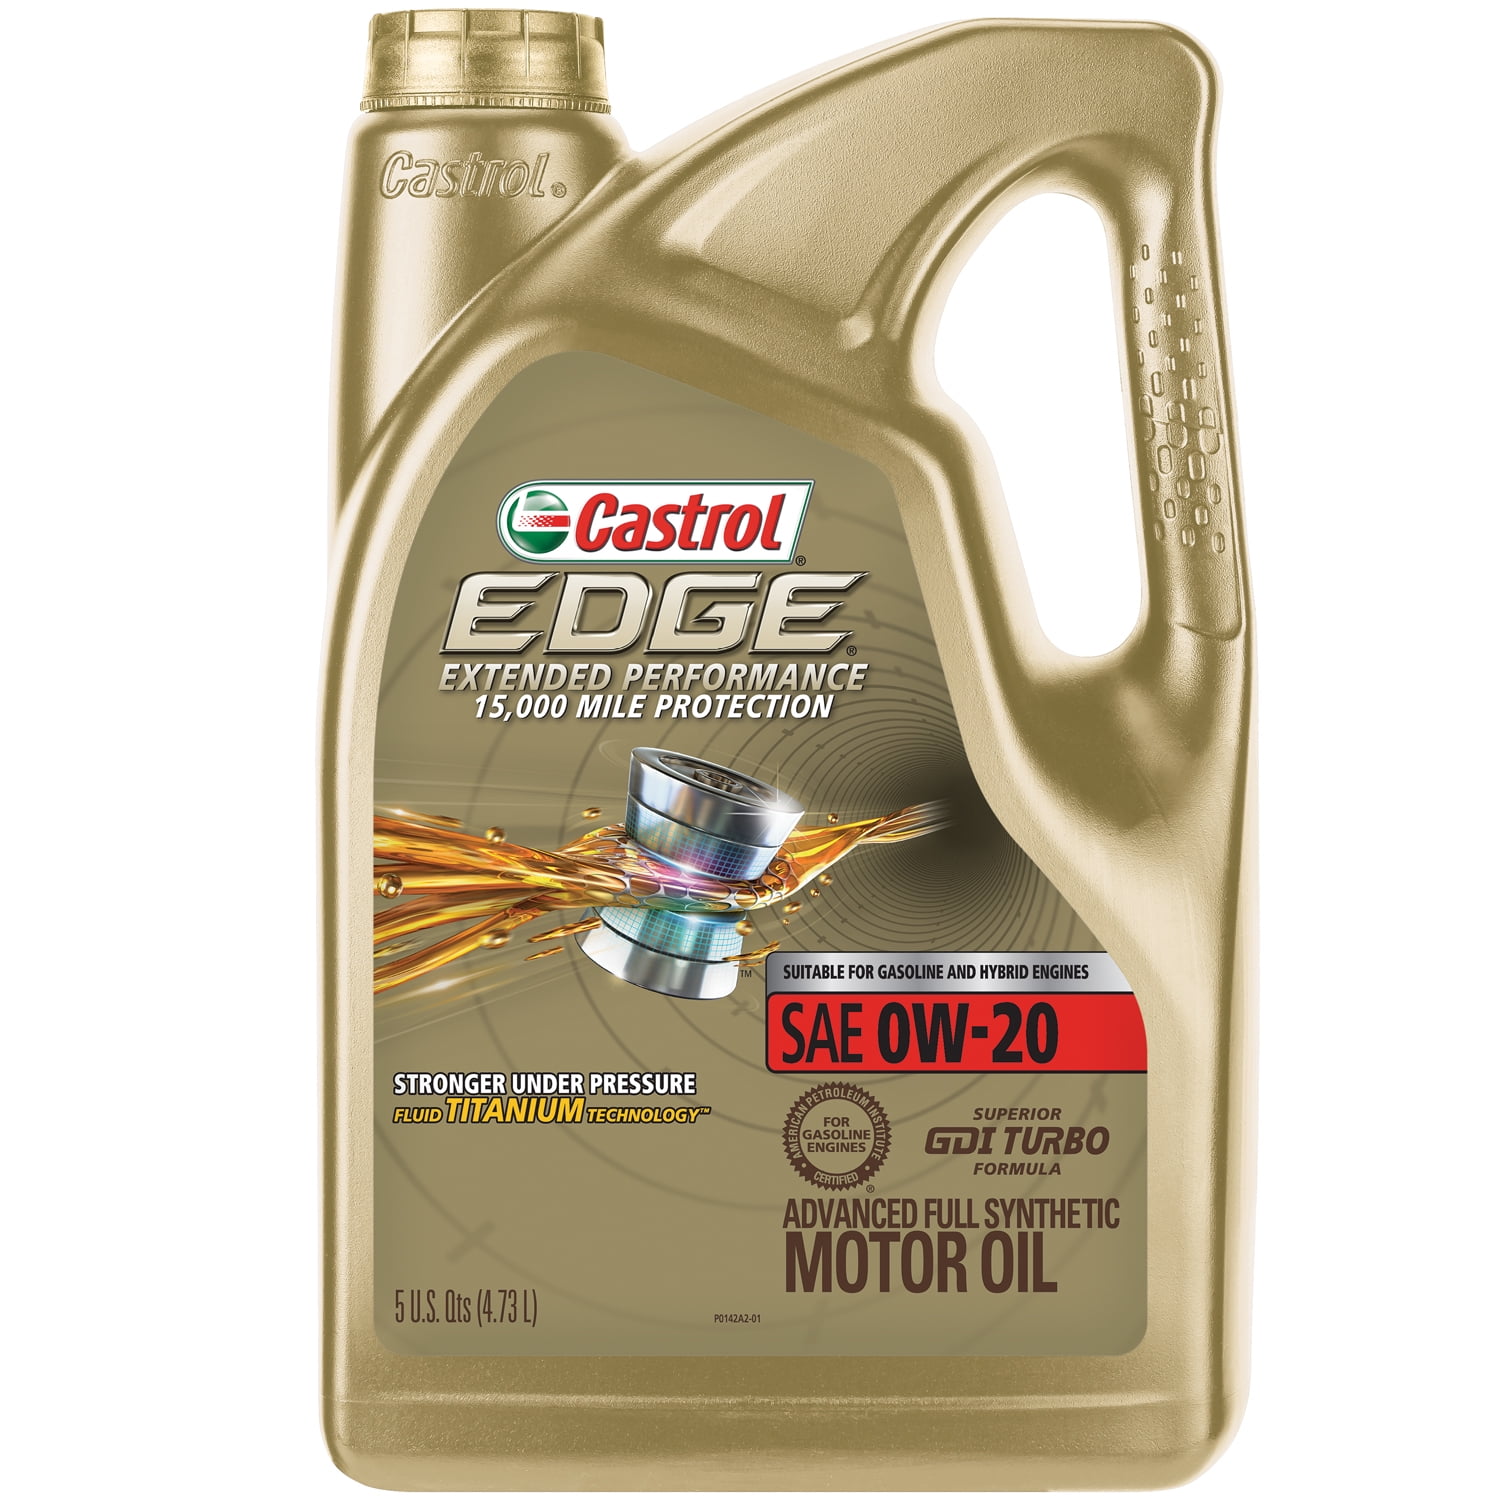 Castrol EDGE Extended Performance 0W20 Advanced Full Synthetic Motor